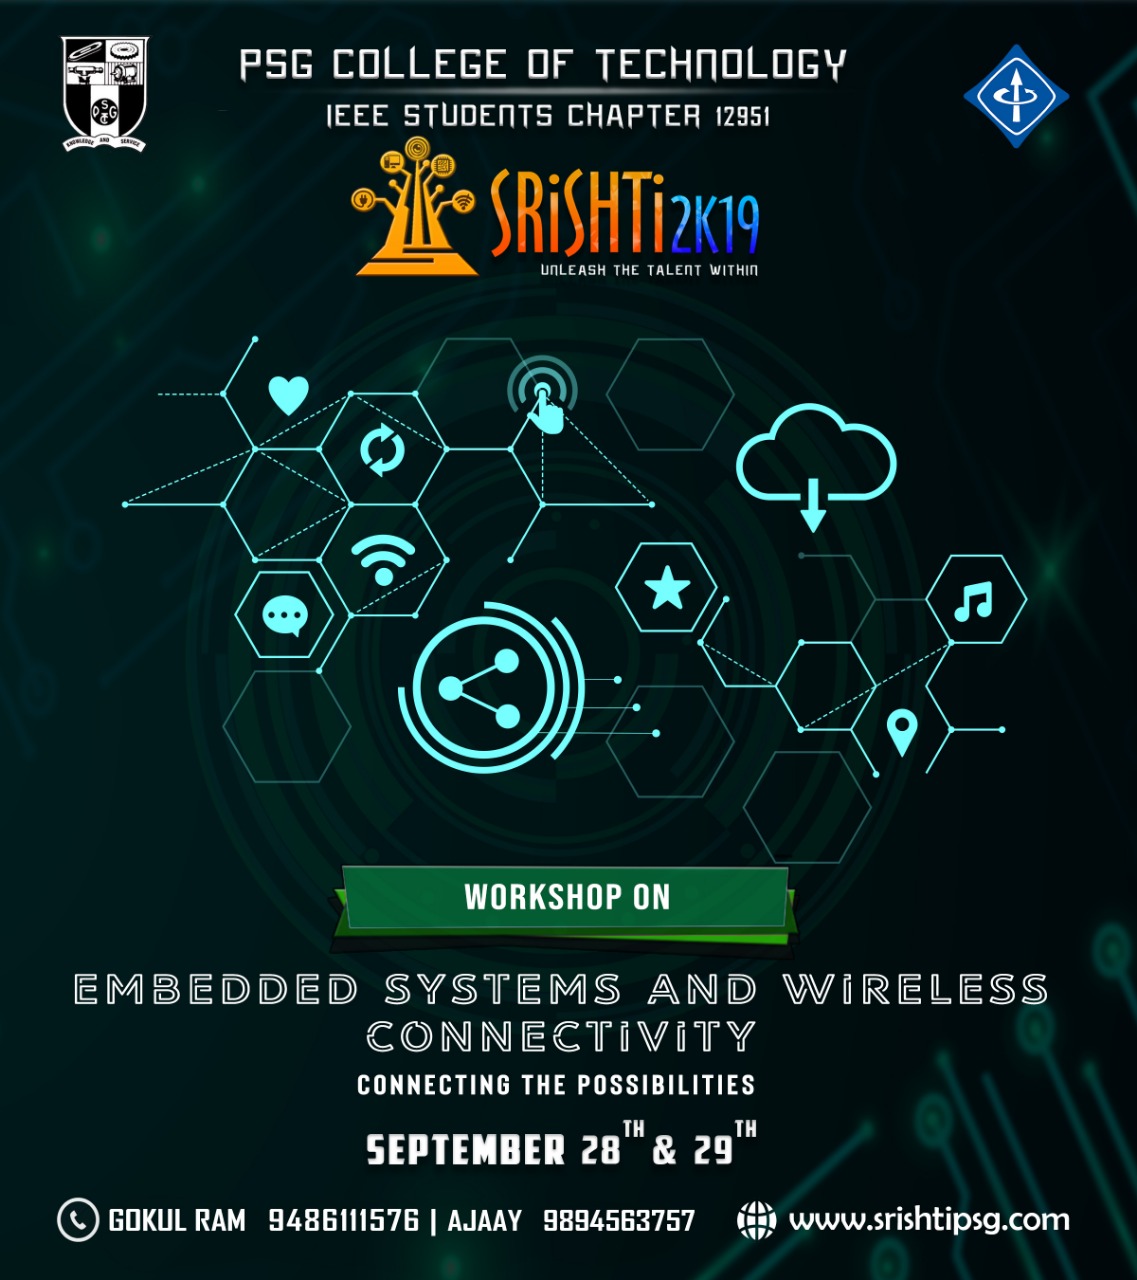 Embedded systems and Wireless Connectivity 2019